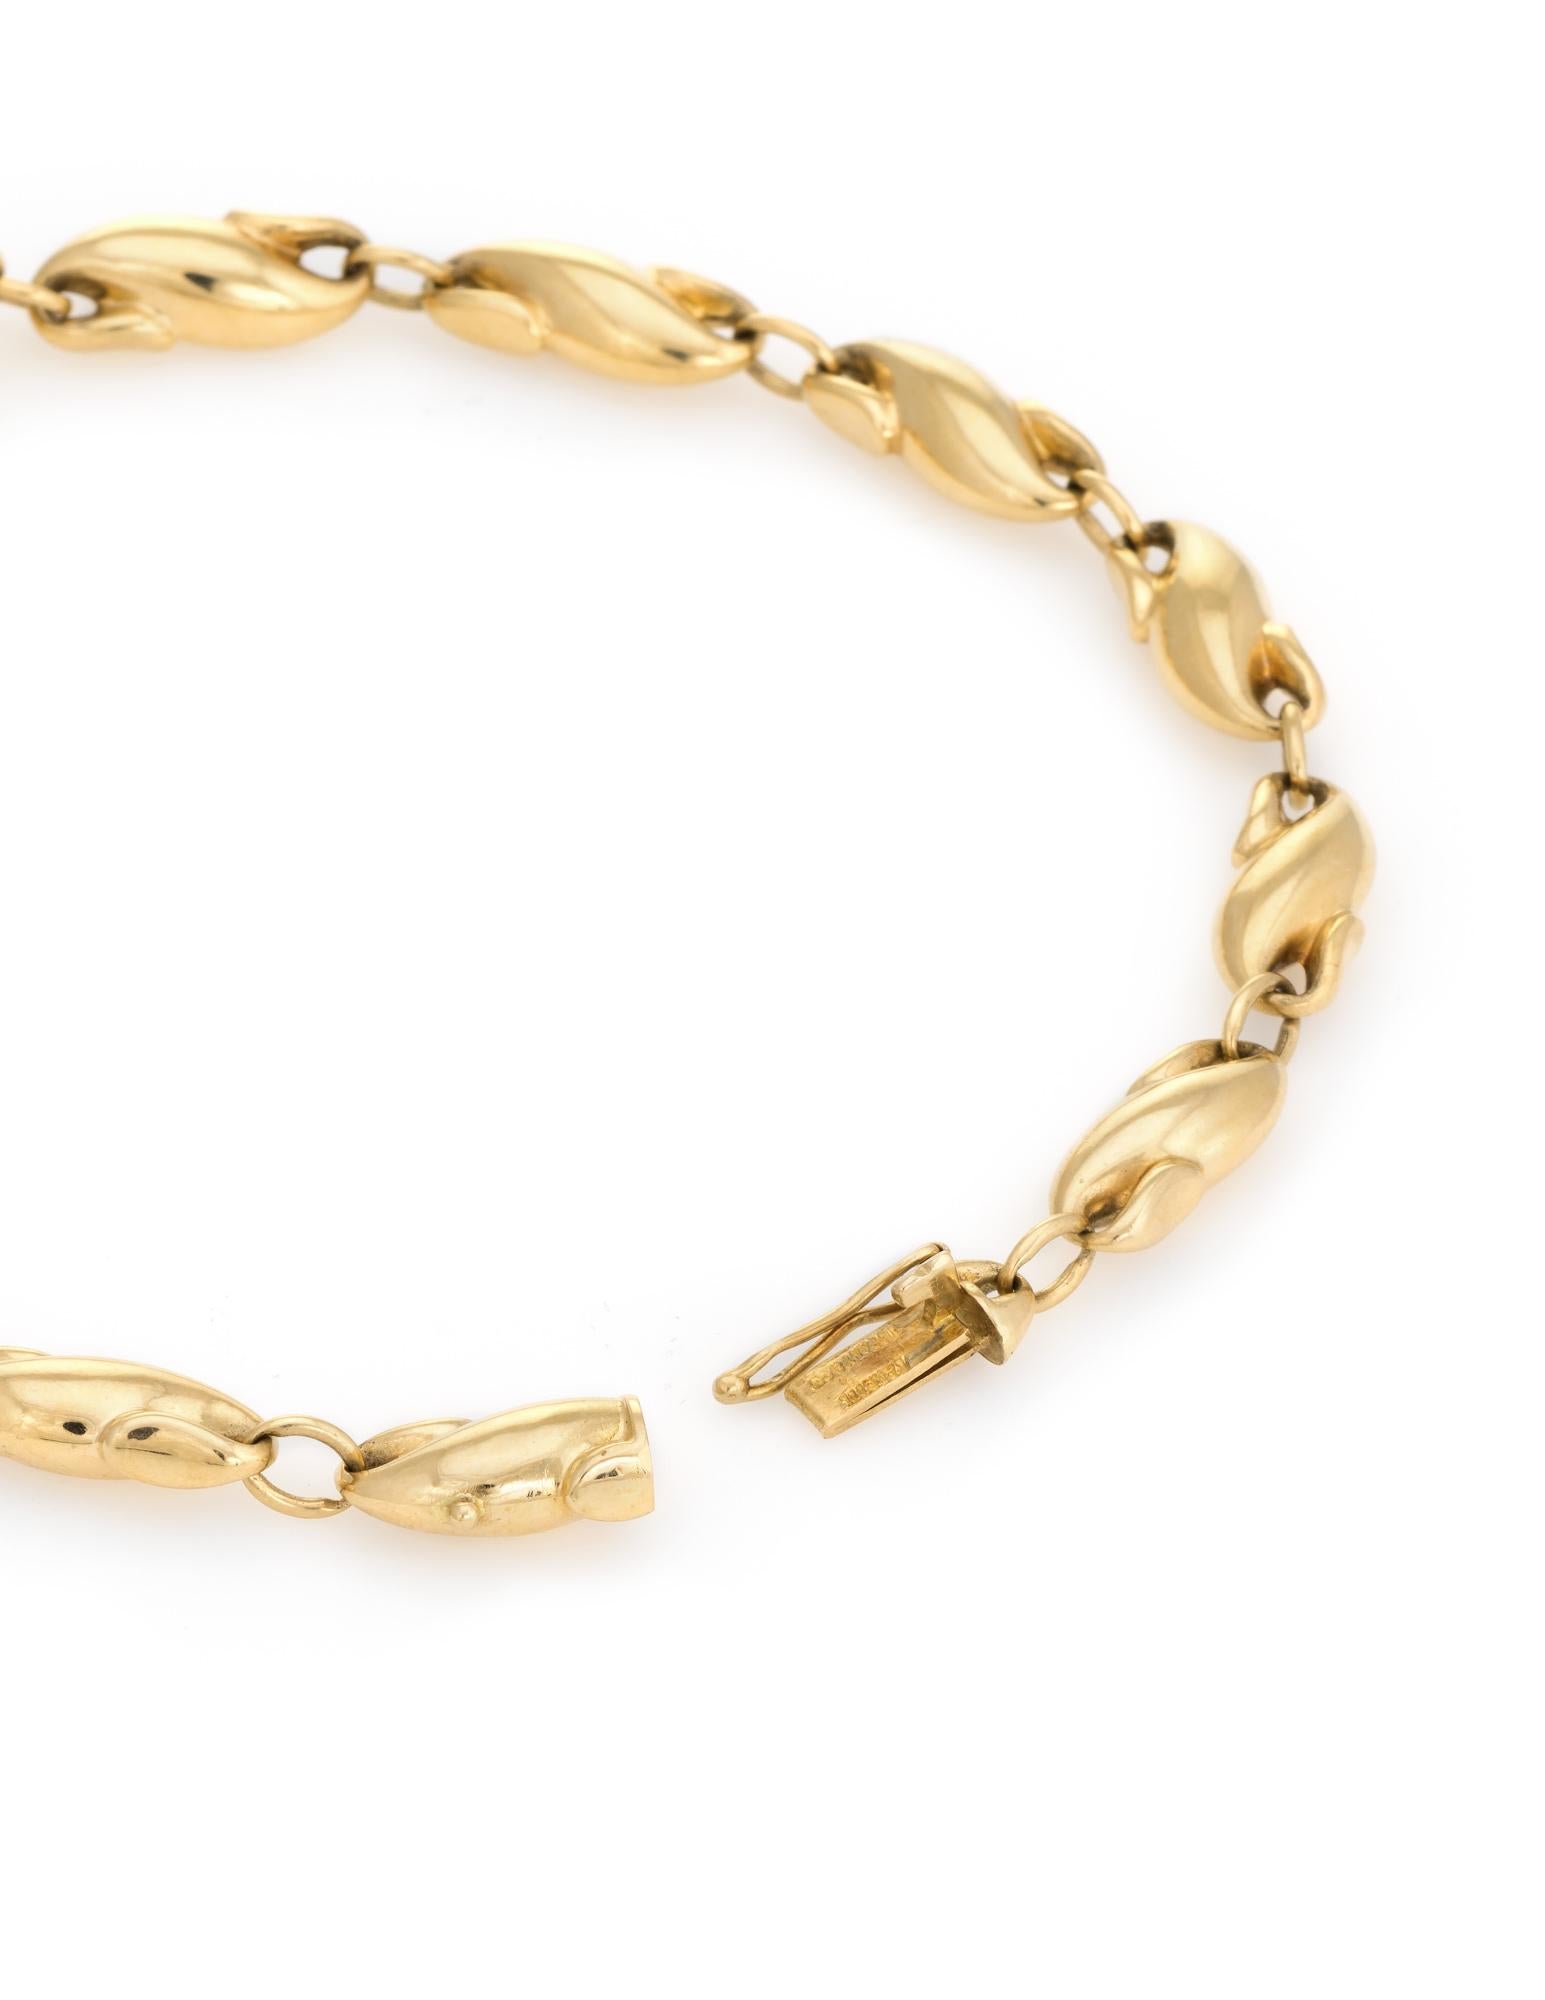 Stylish and finely detailed vintage Tiffany & Co infinity link bracelet (circa 1990s) crafted 18k yellow gold.  

The infinity link bracelet is great worn alone or layered with your fine jewelry from any era.  

The bracelet is in very good